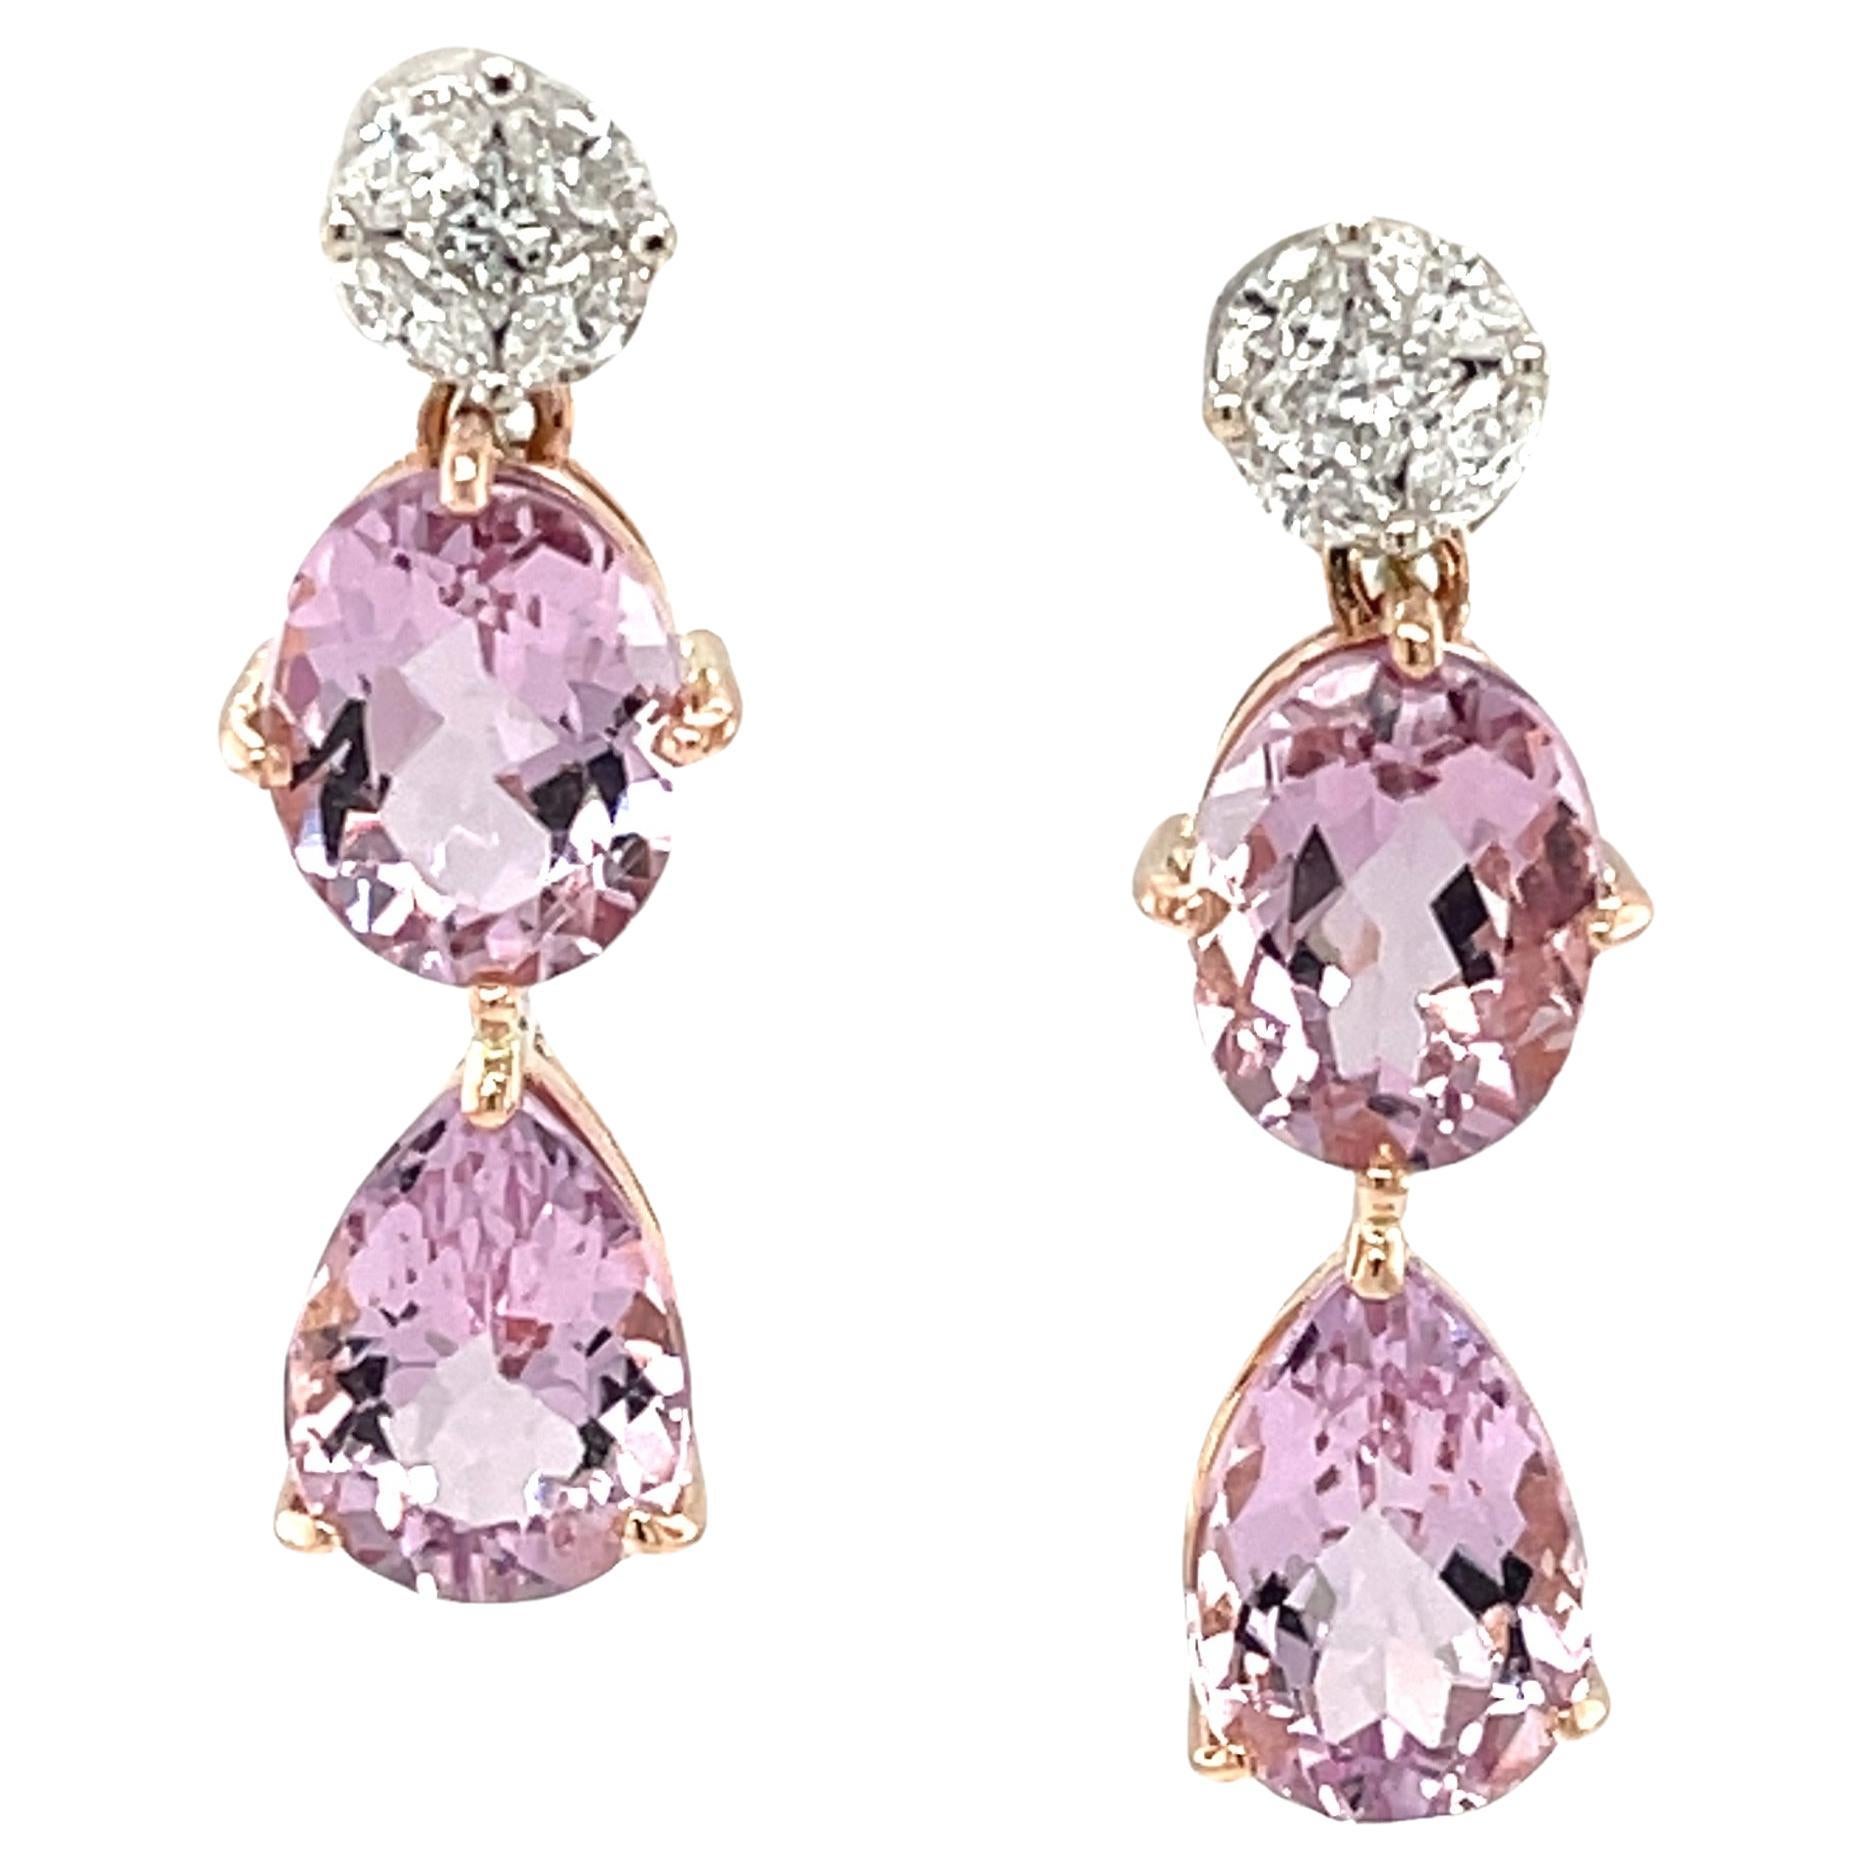  Morganite Drop Post Earrings with Diamond Tops in 18k Rose and White Gold For Sale